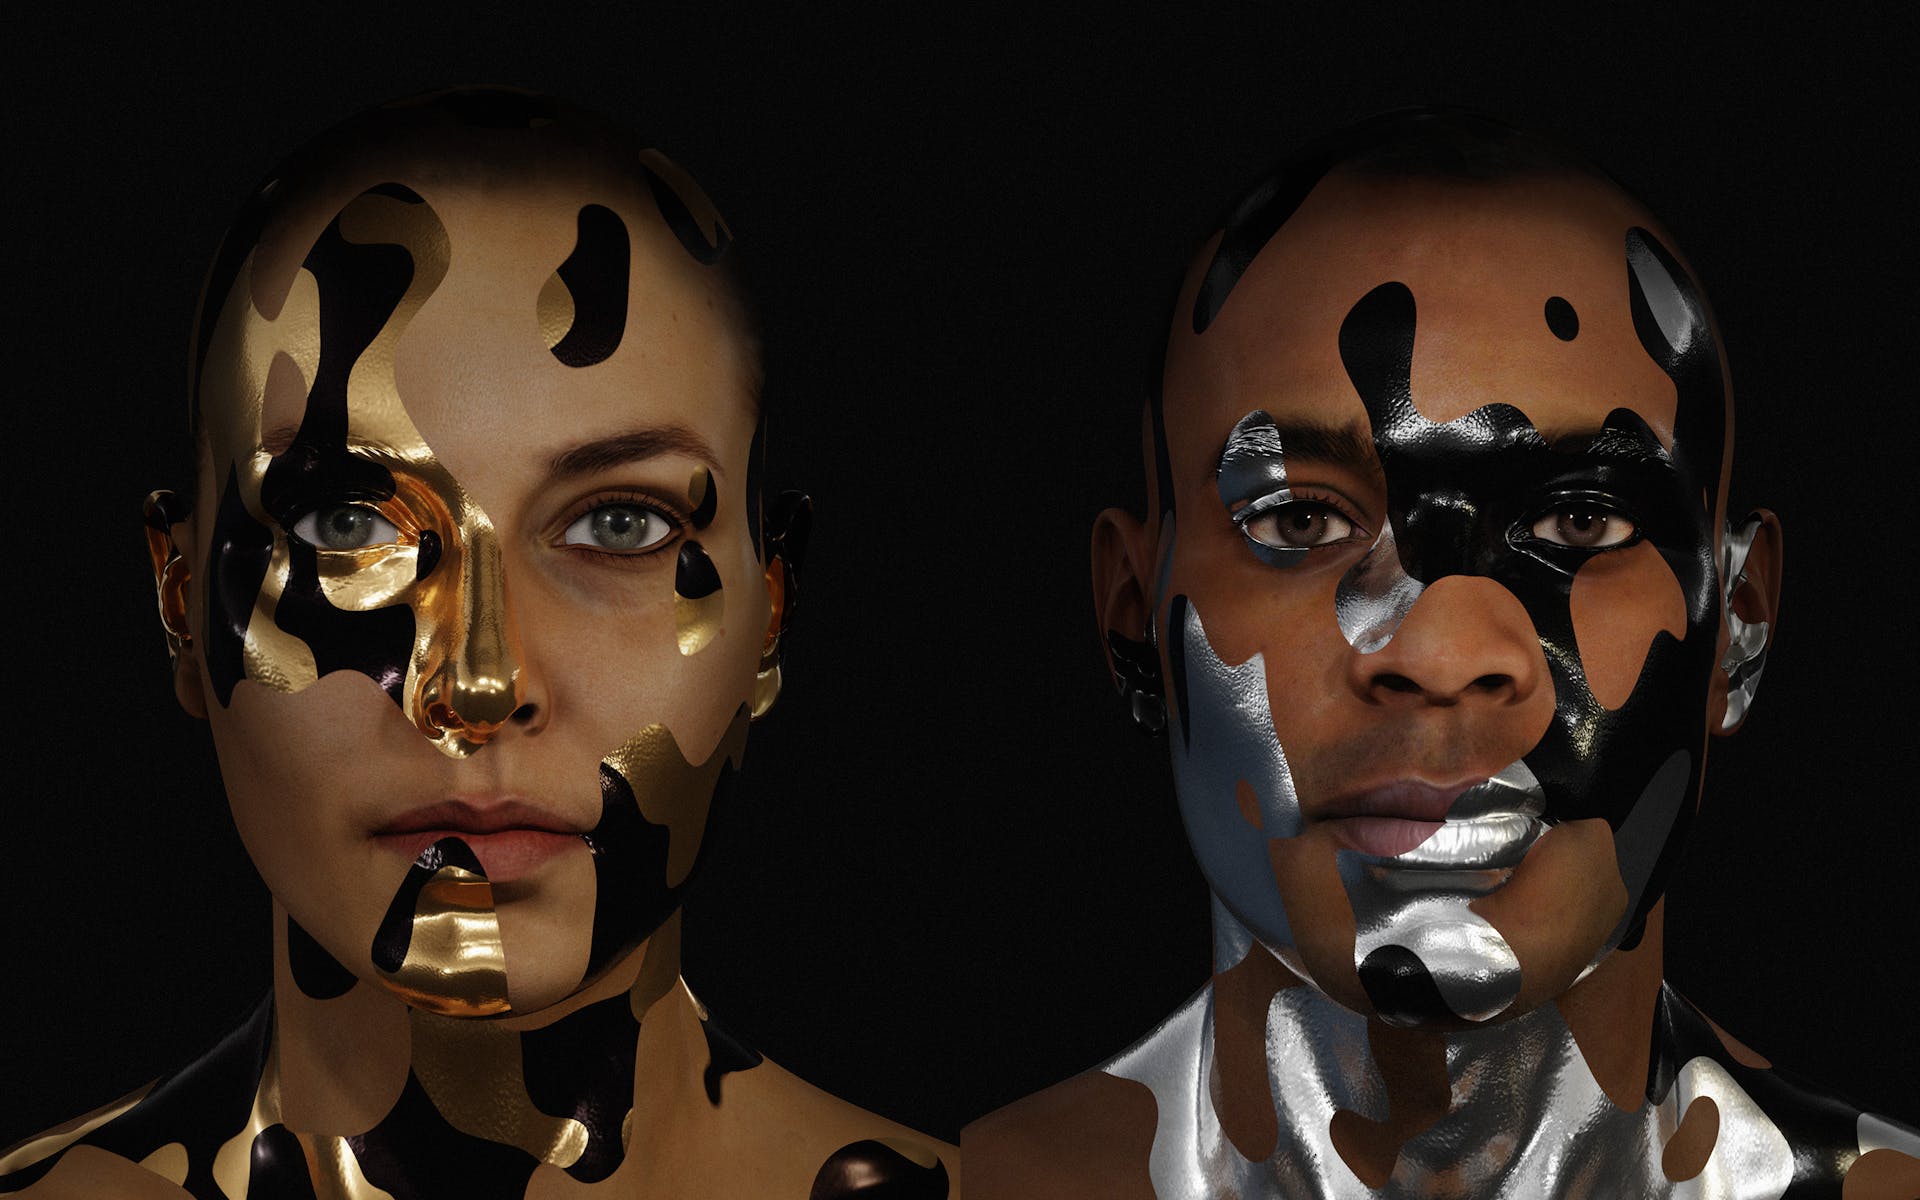 Image of woman and man with metallic camouflage-like face paint